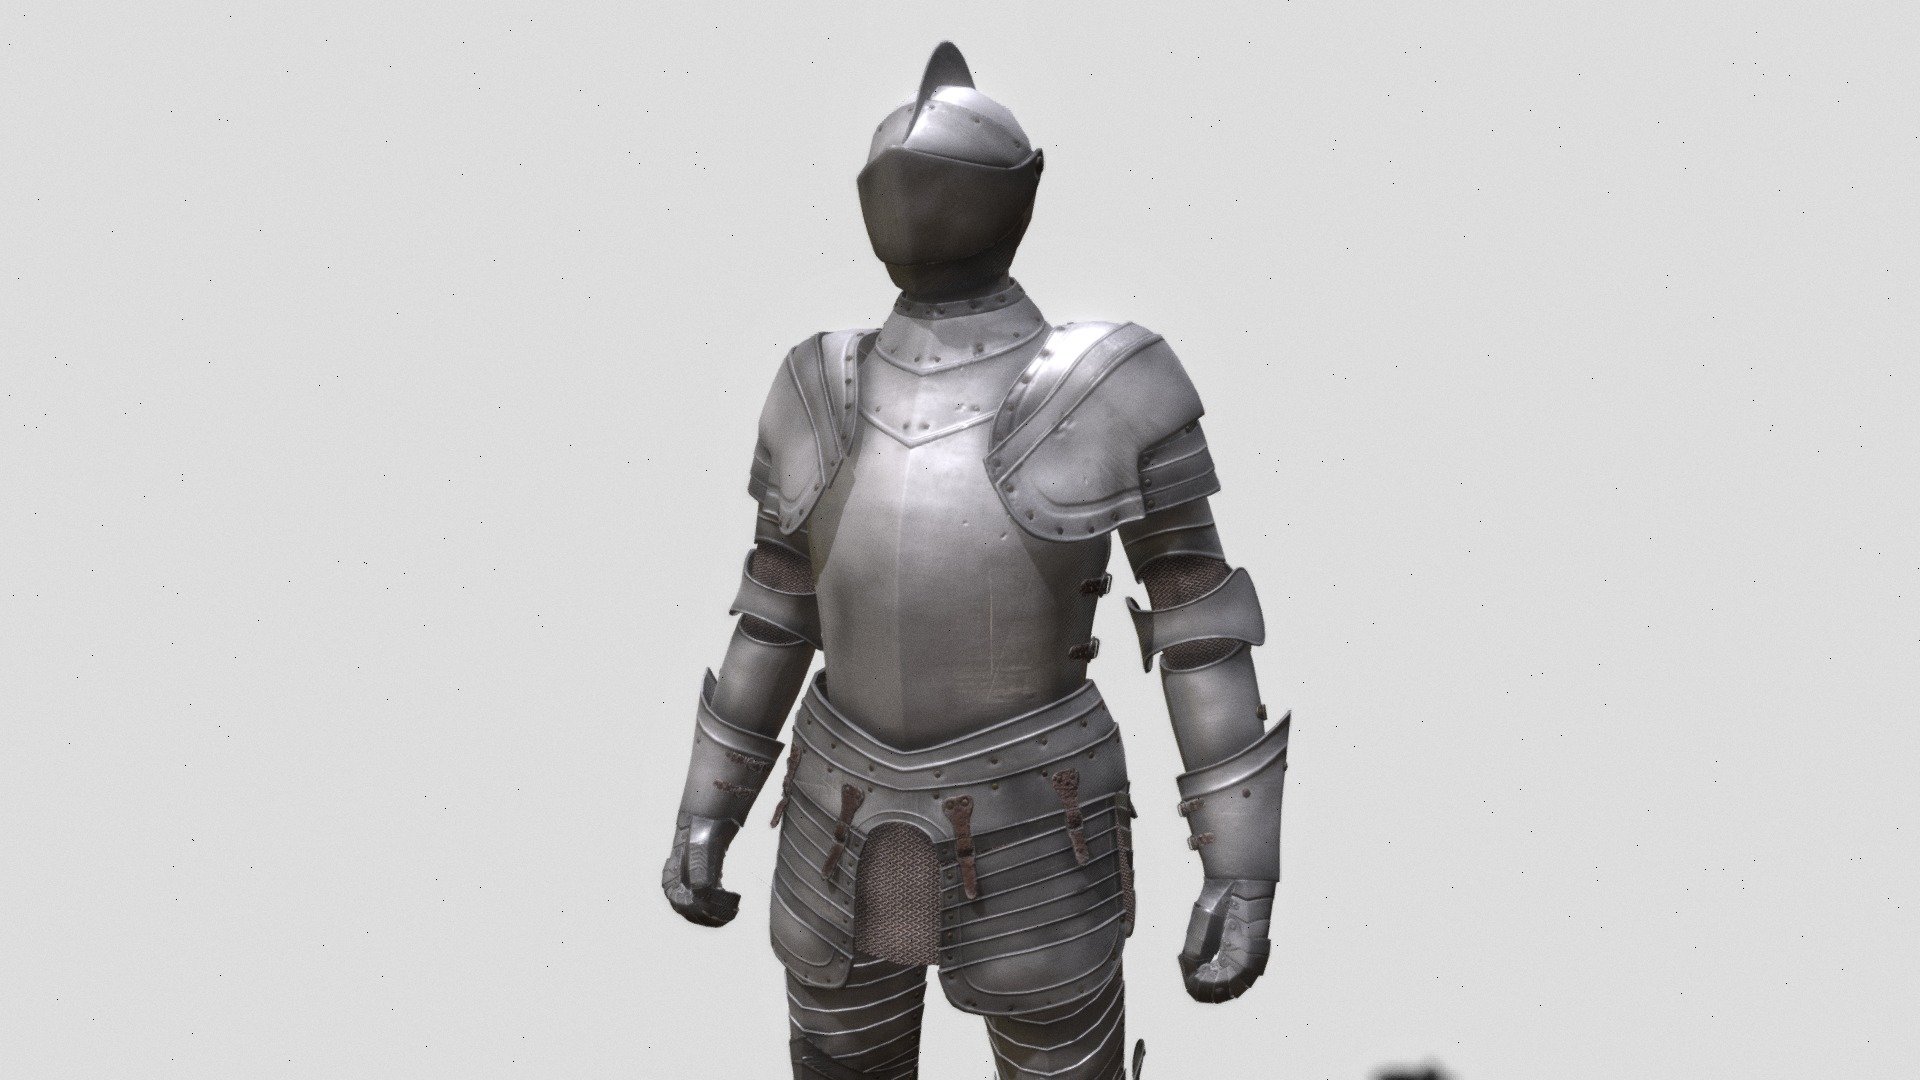 medival knight rigged for game-ready
high-quality photorealistic textured - Knight - 3D model by photorealstudio 3d model